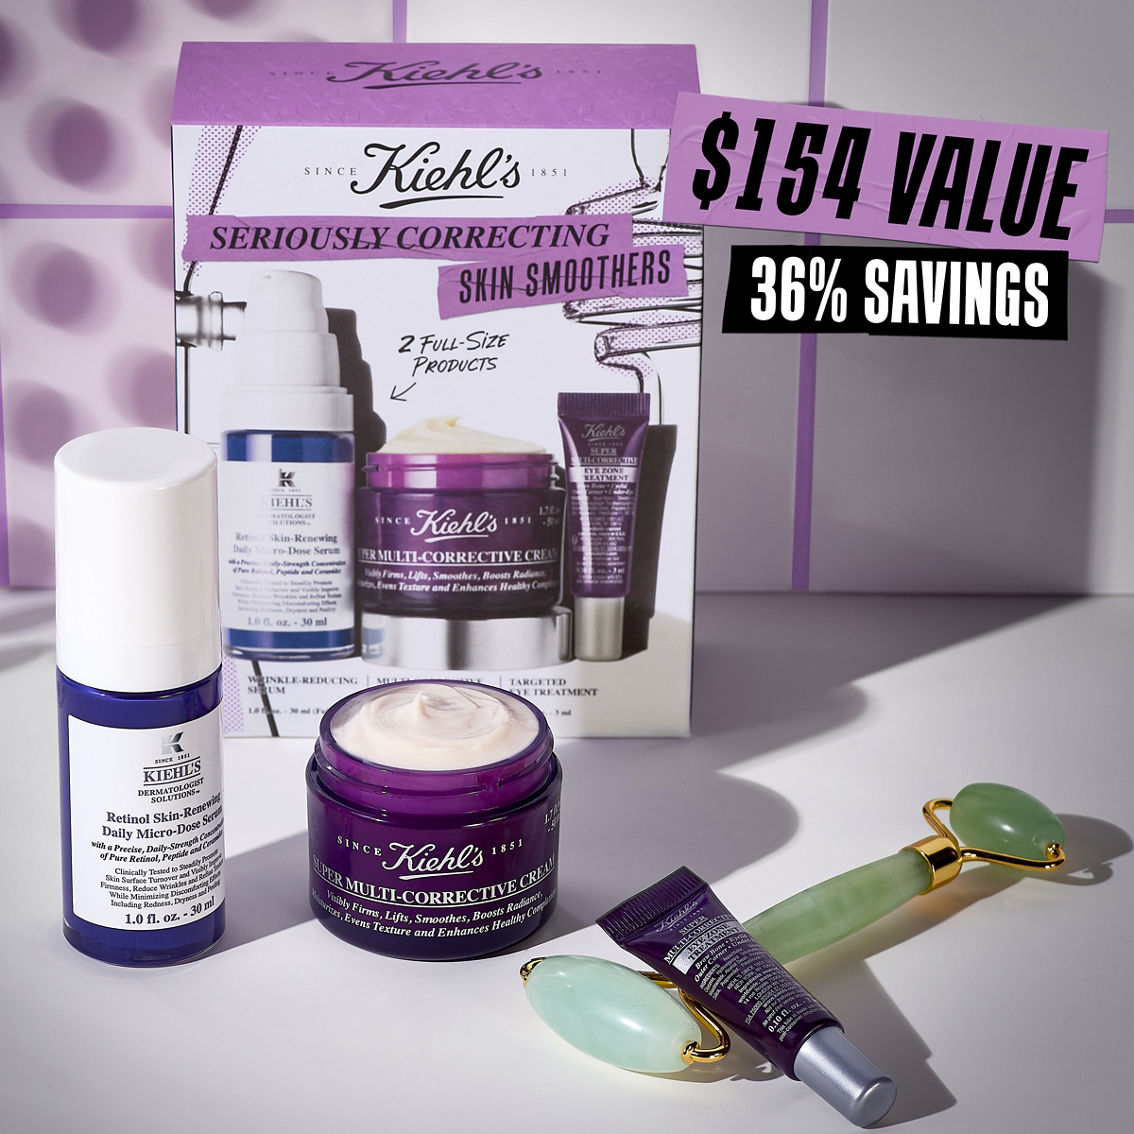 Kiehl's Seriously Correcting Skin Smoothers Gift Set - Image 3 of 4